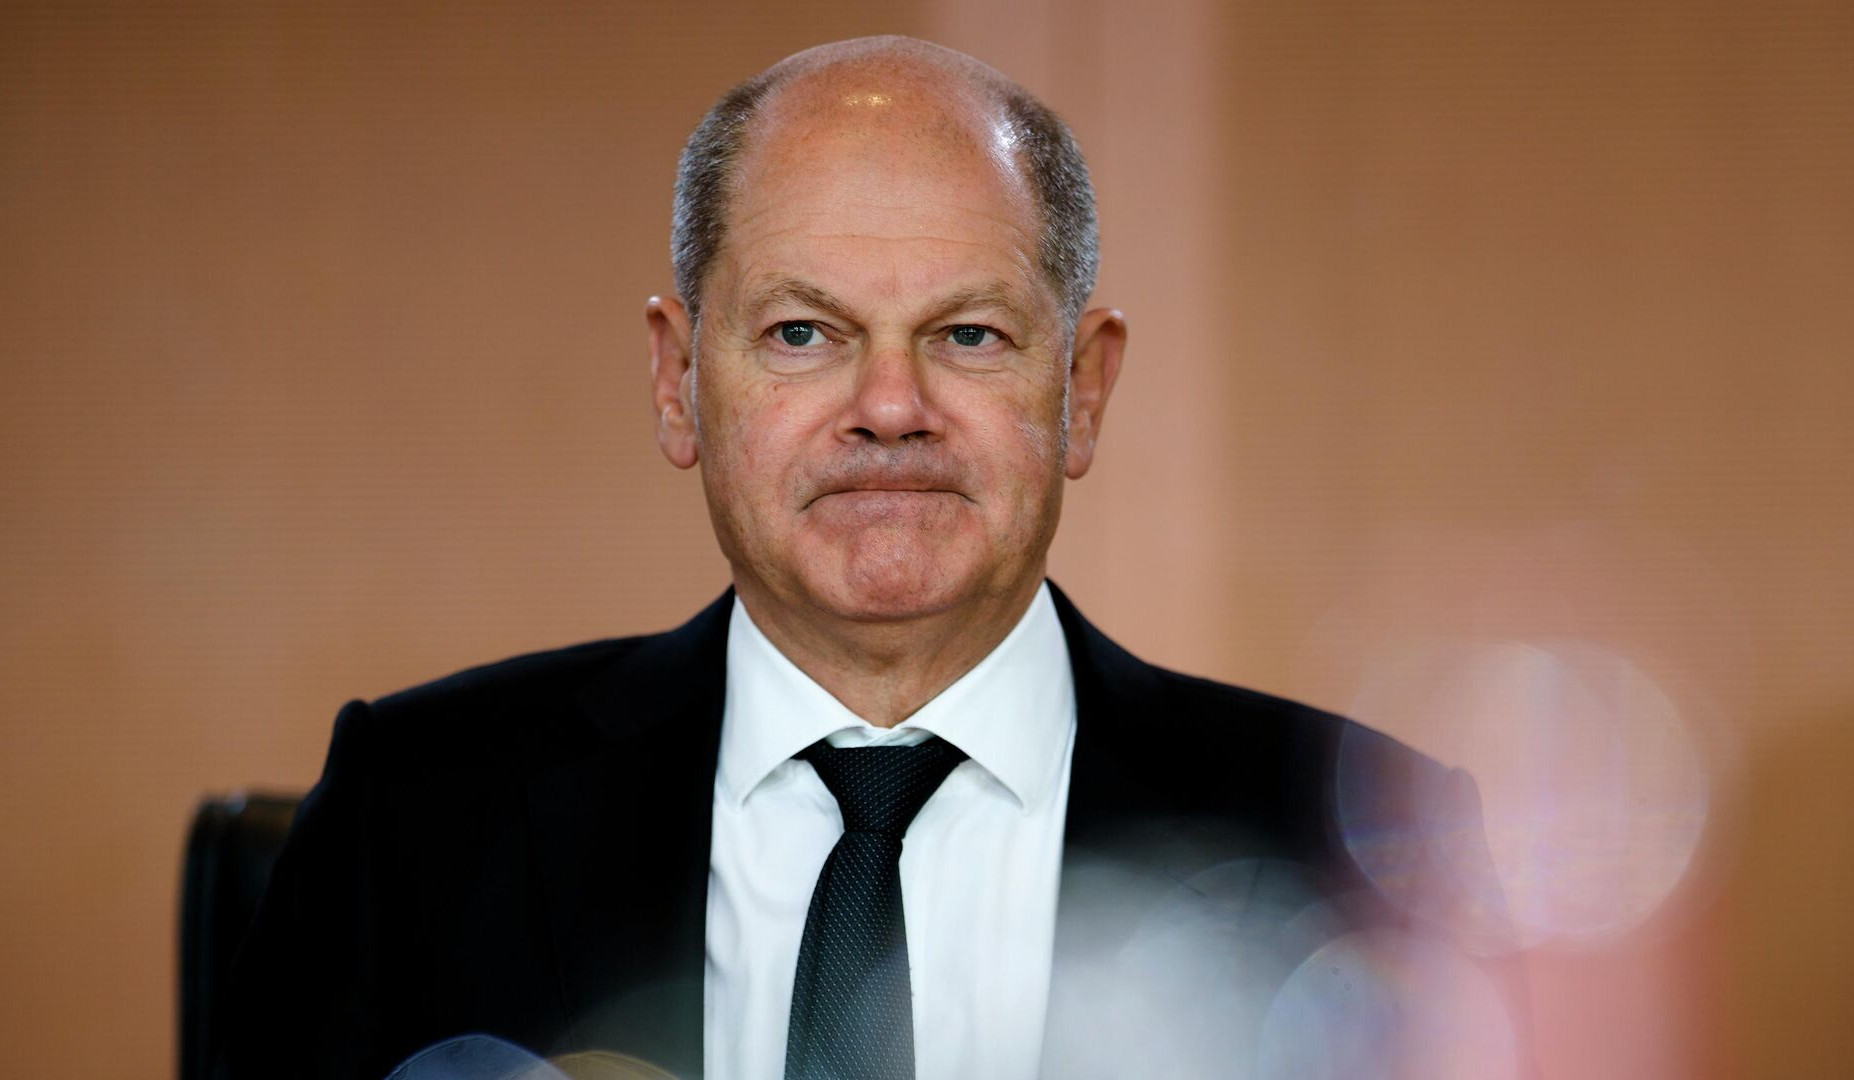 Germany is ready for difficulties caused by lack of Russian gas supply: Scholz